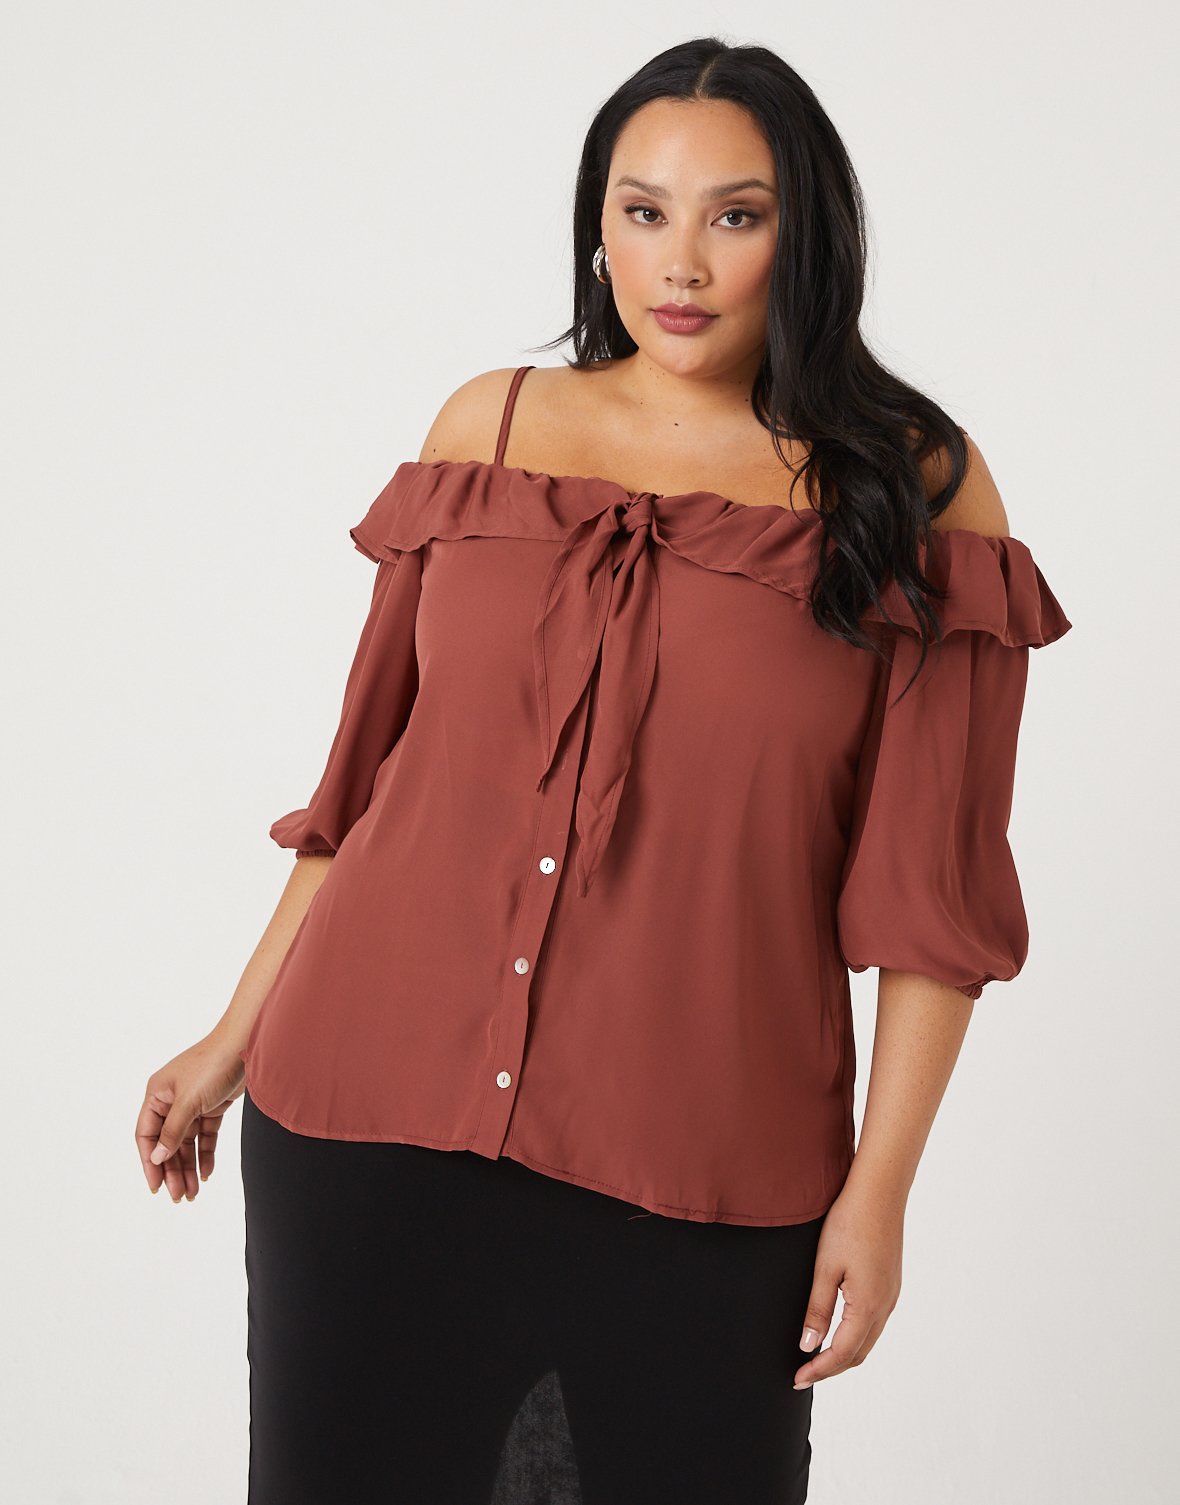 Plus Size Ruffled Cold Shoulder Top